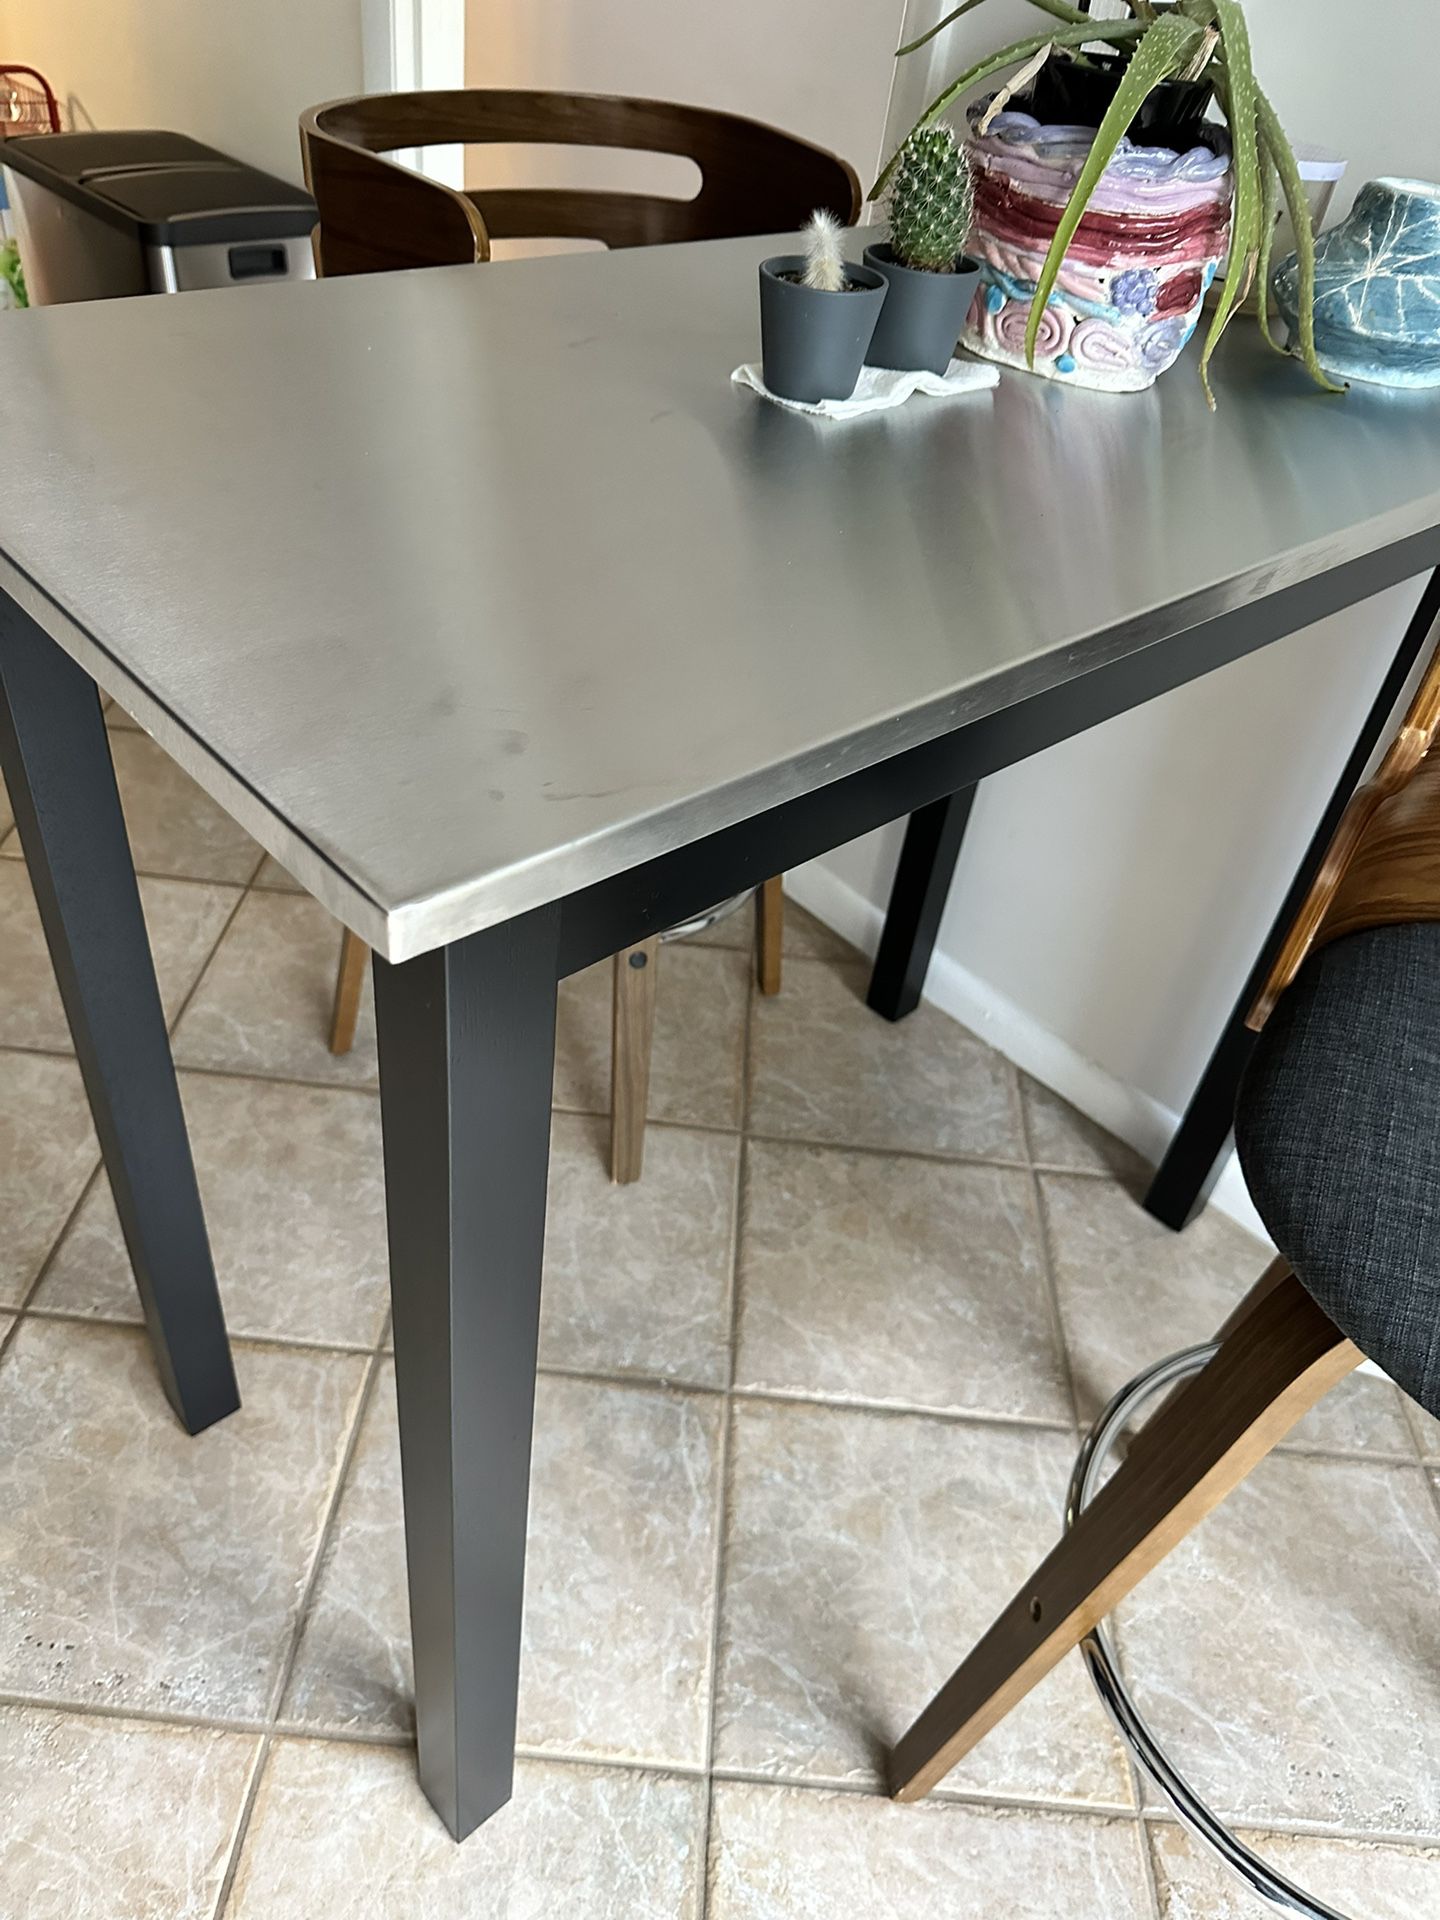 Stainless Steal Table And Chairs 